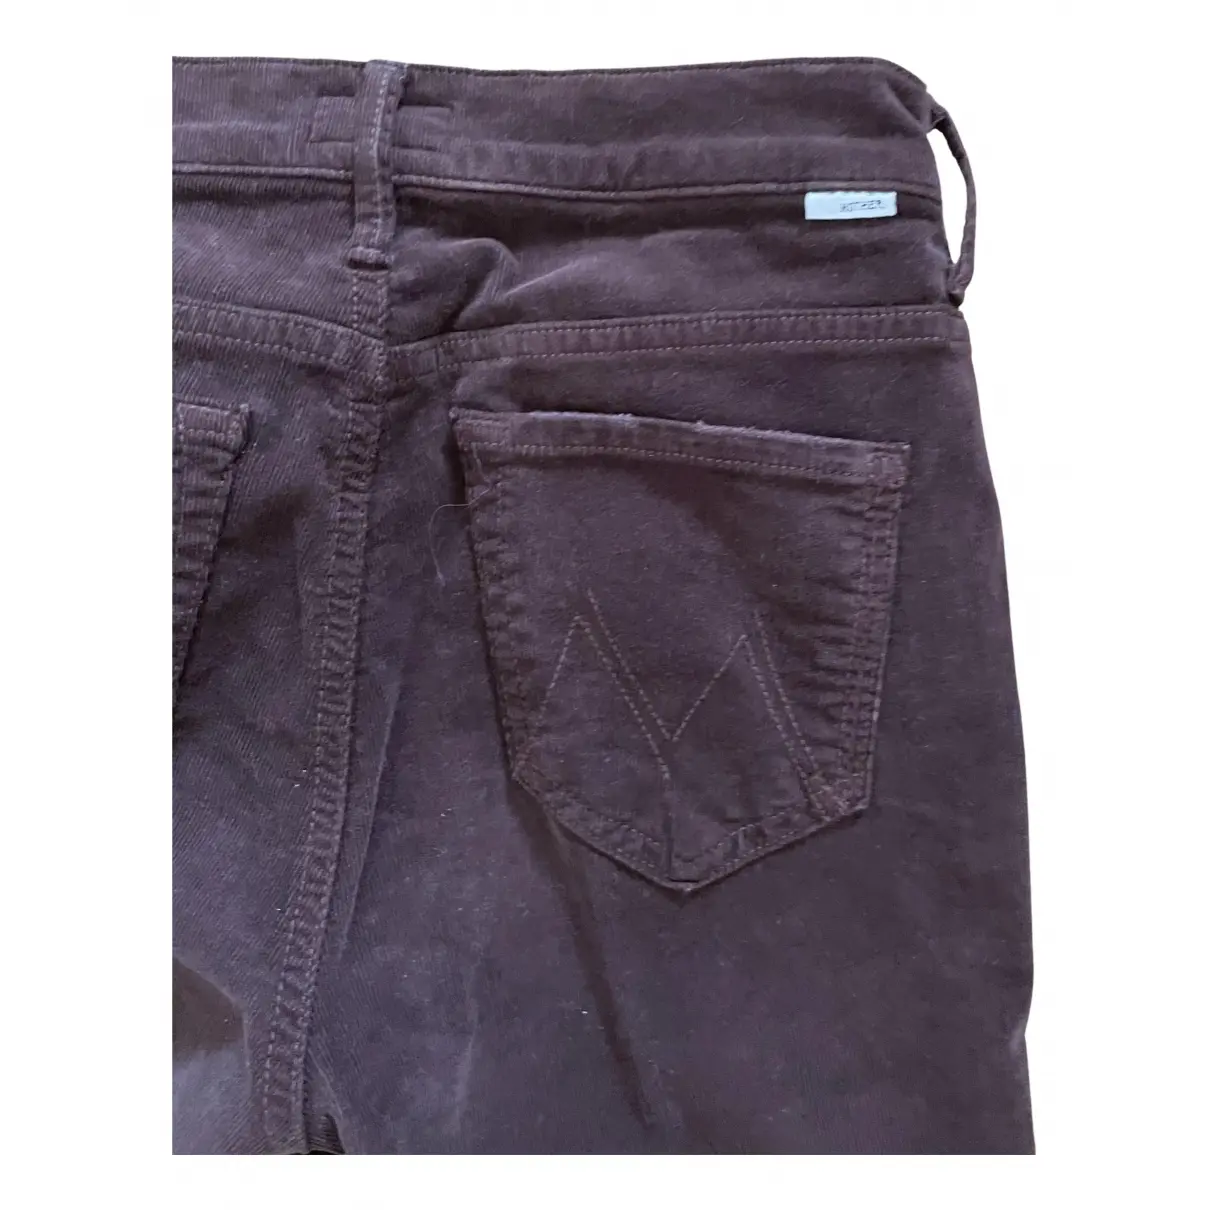 Buy Mother Large jeans online